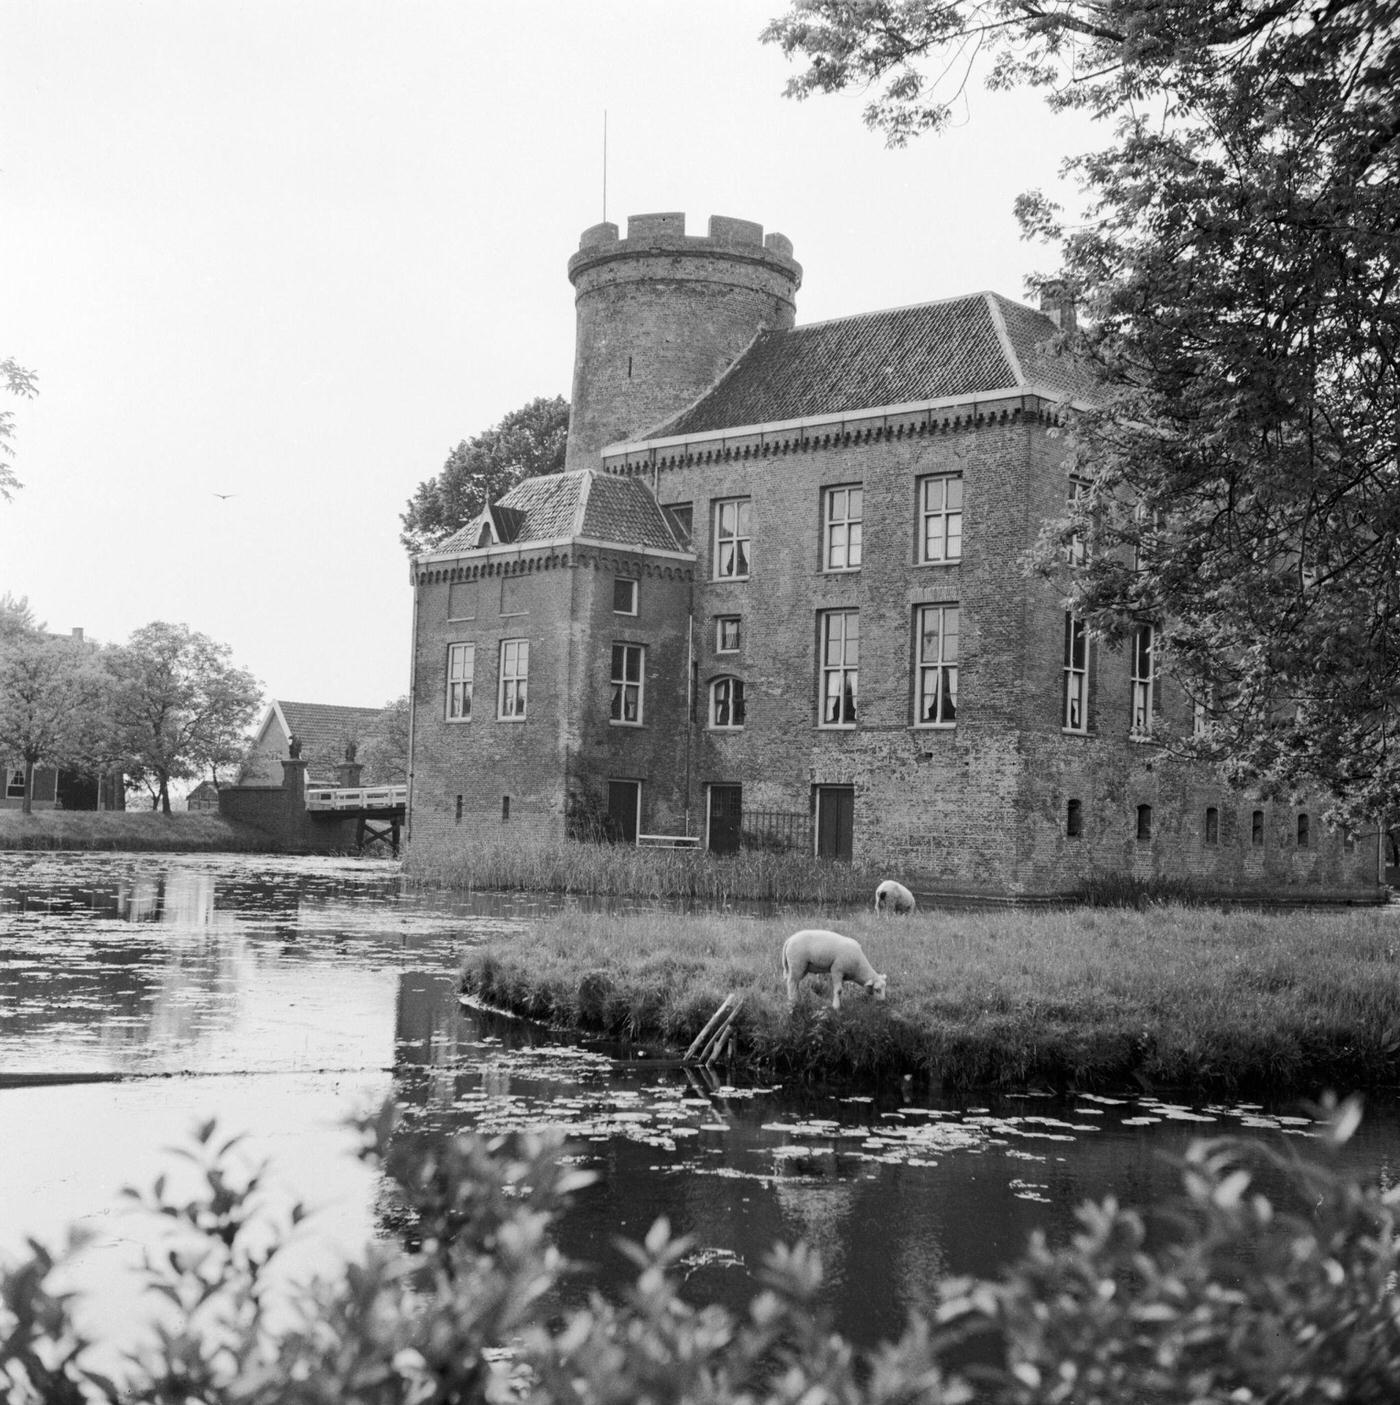 A picturesque castle built on a small island with sheep grazing on the surrounding grass, 1955.